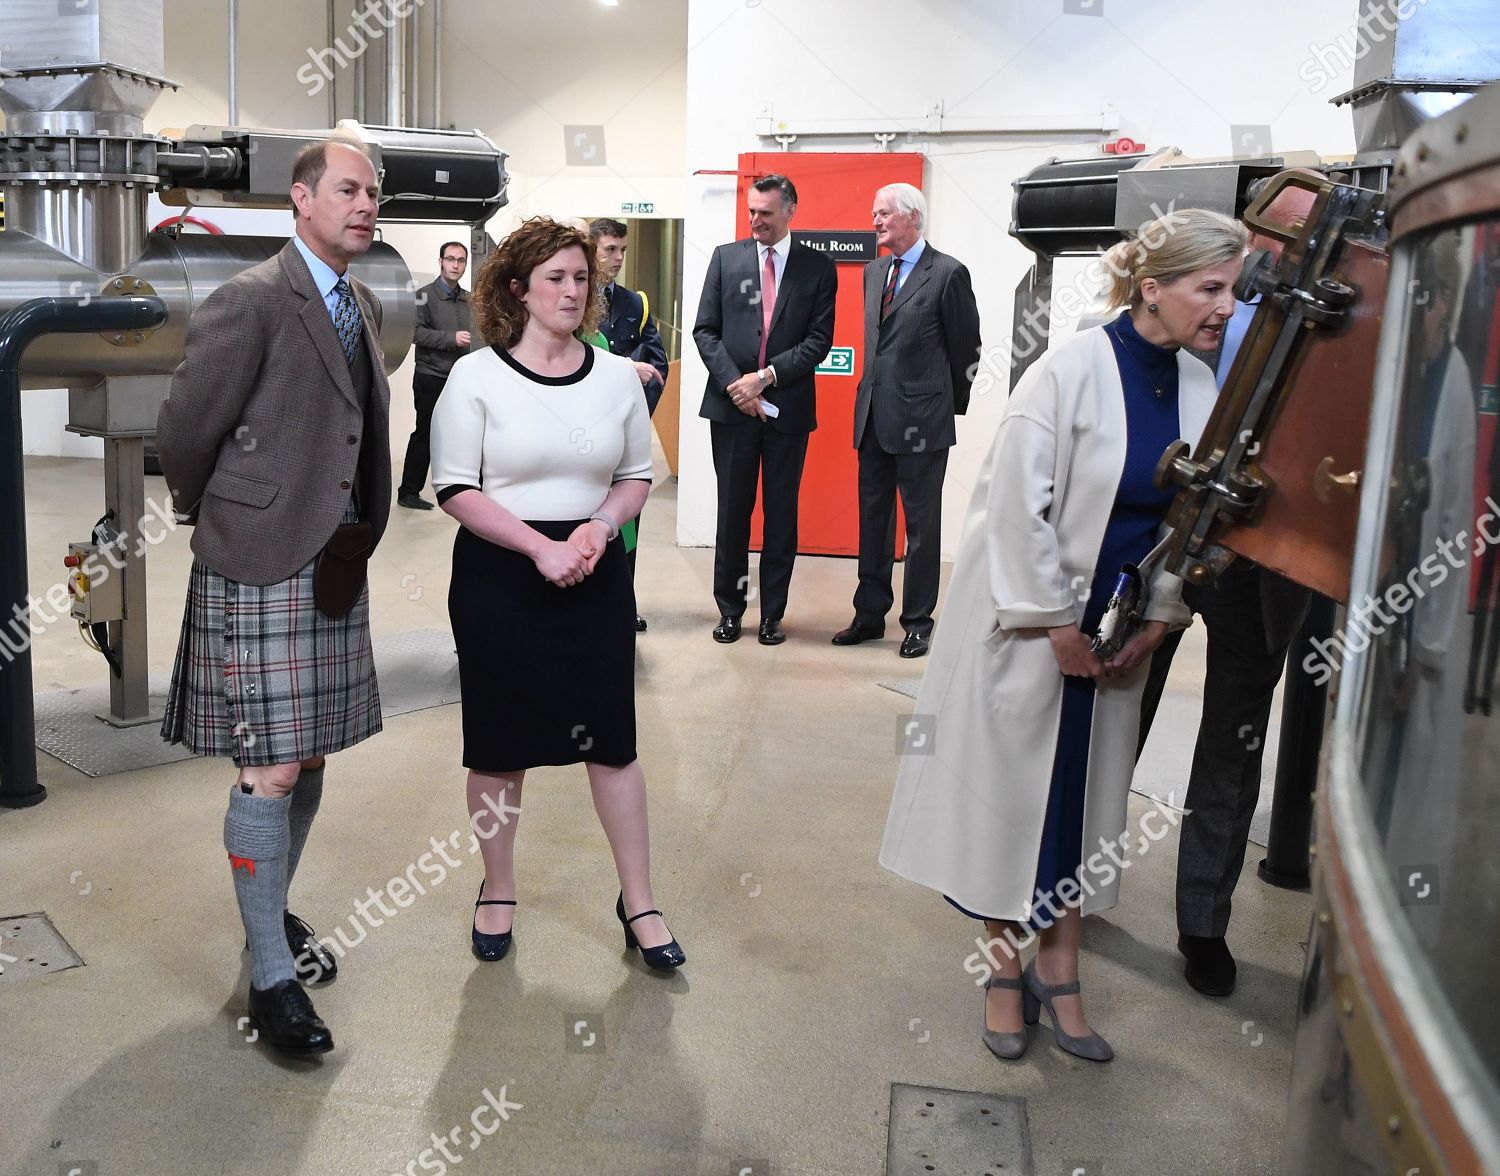 CASA REAL BRITÁNICA - Página 93 Sophie-countess-of-wessex-and-prince-edward-visit-to-scotland-uk-shutterstock-editorial-10326116u